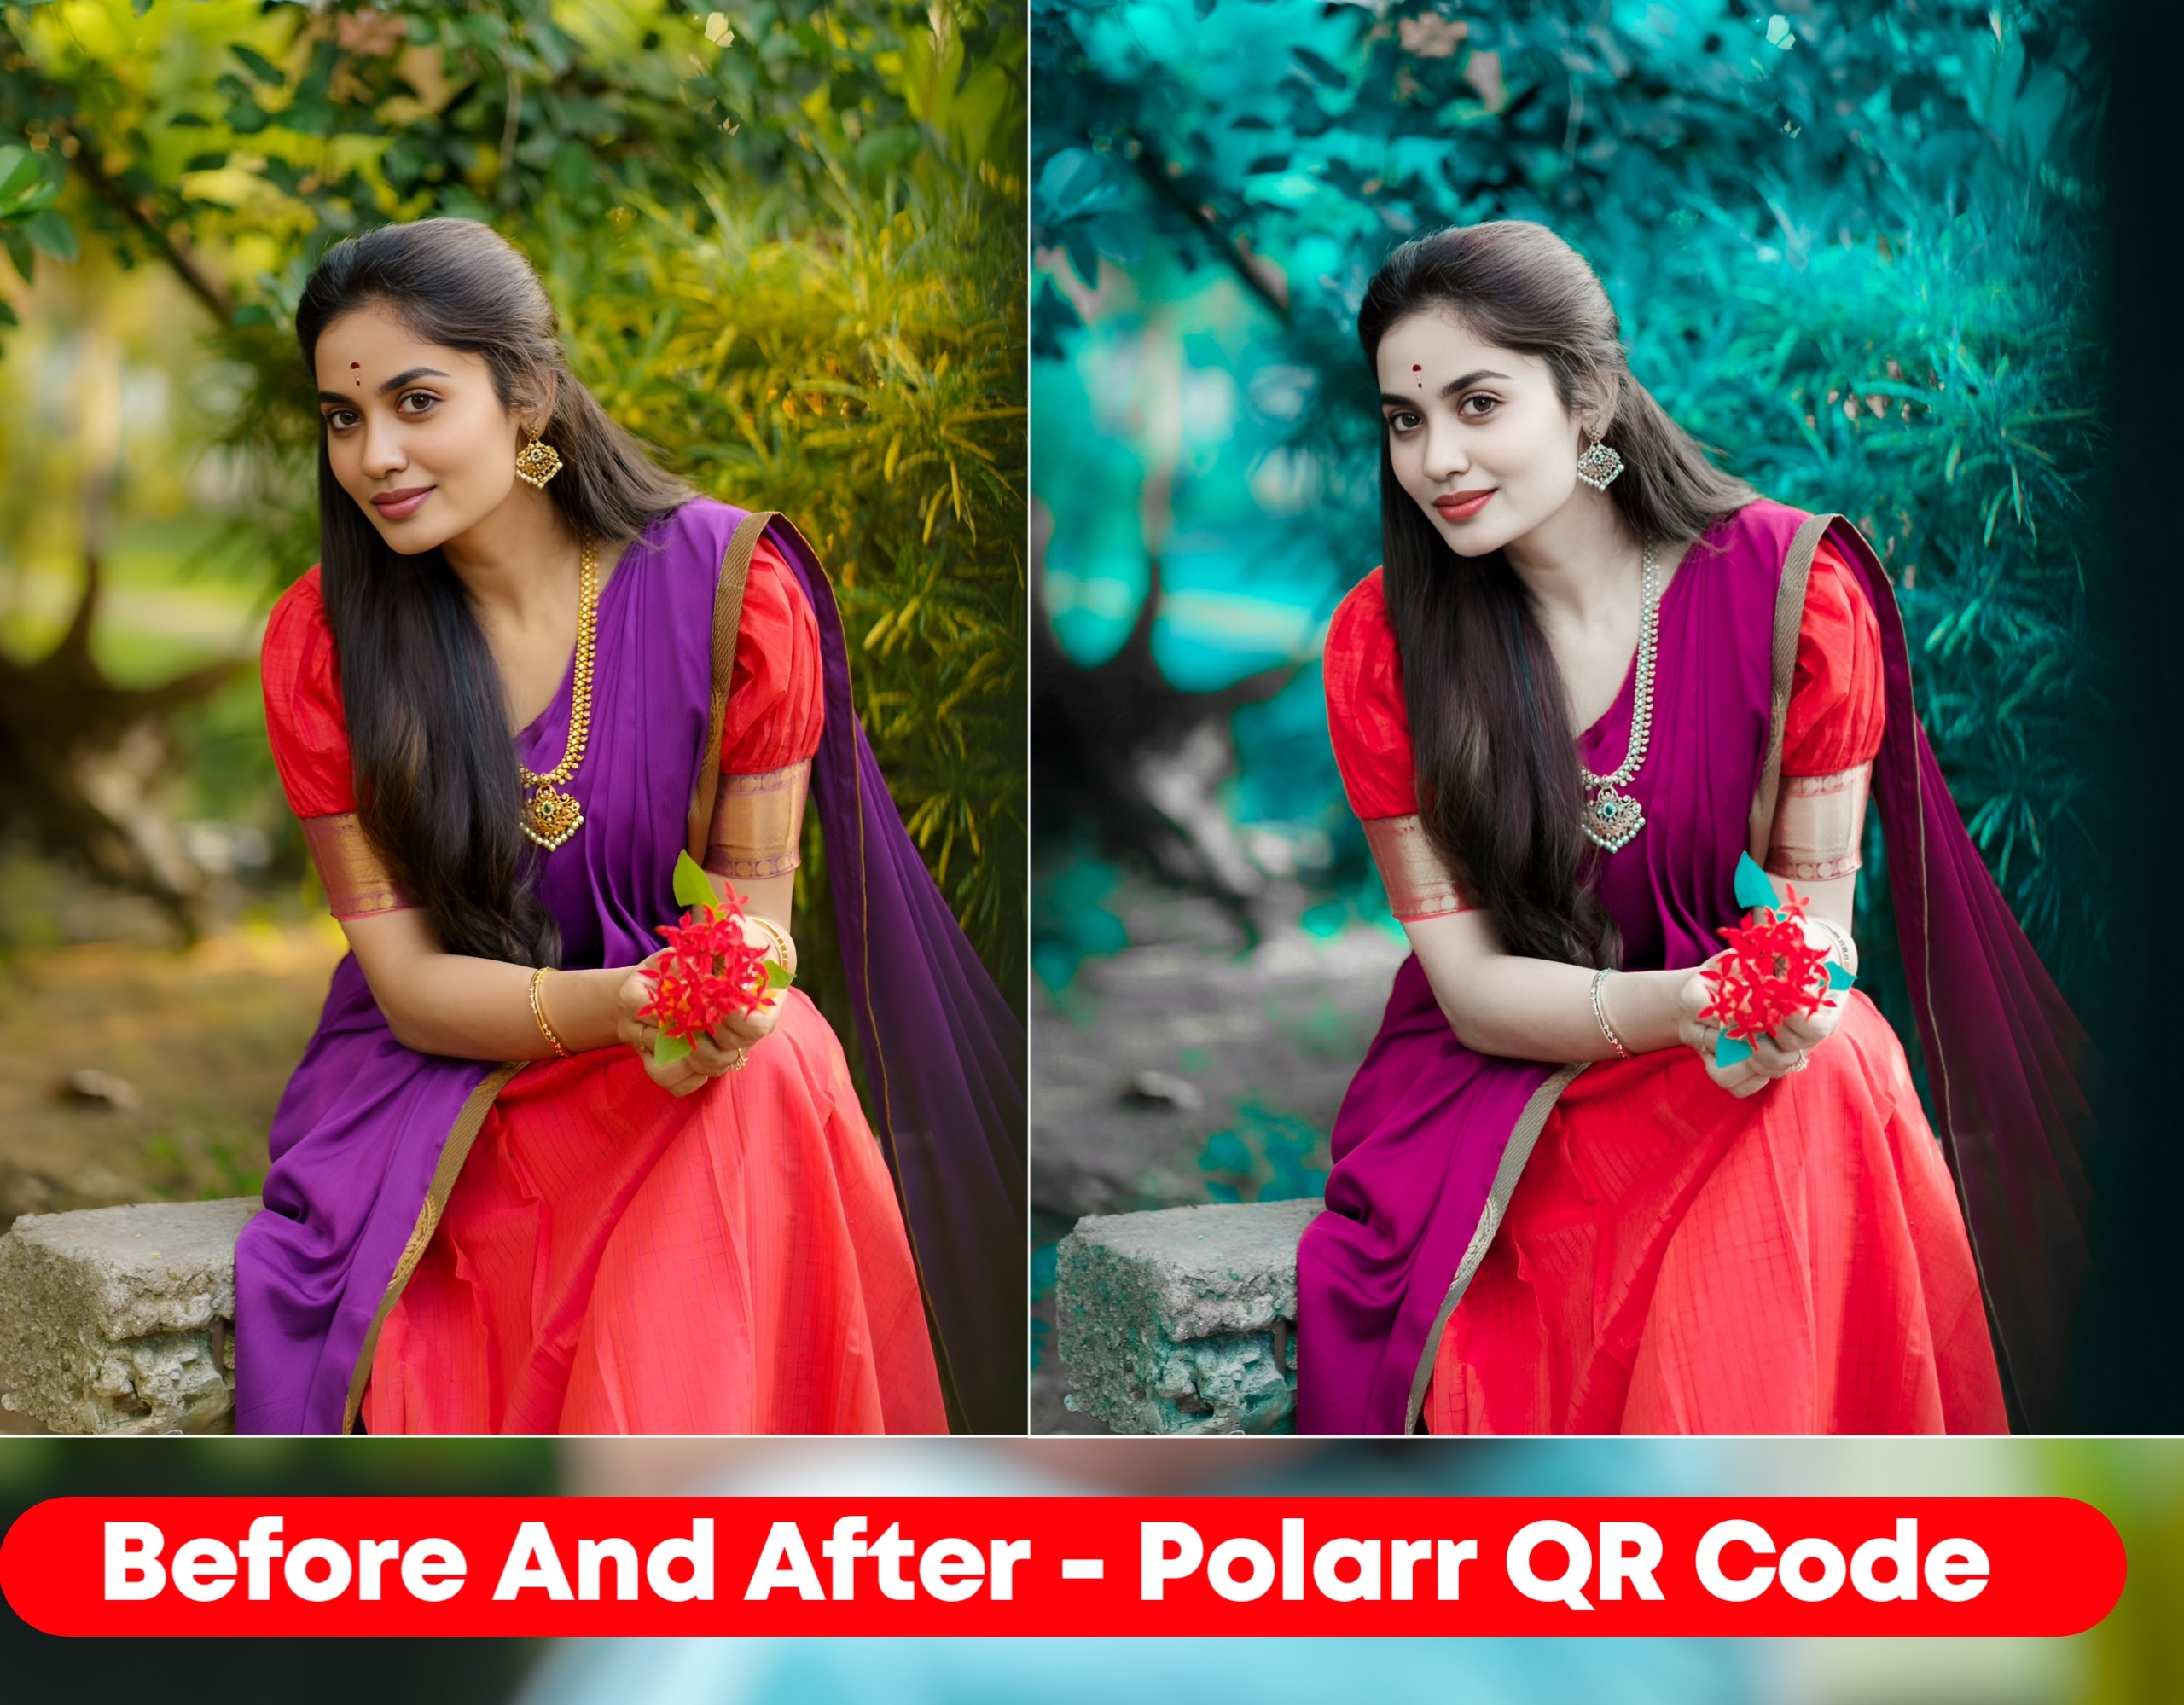 Polarr QR Code Photo Editing - Before And After 